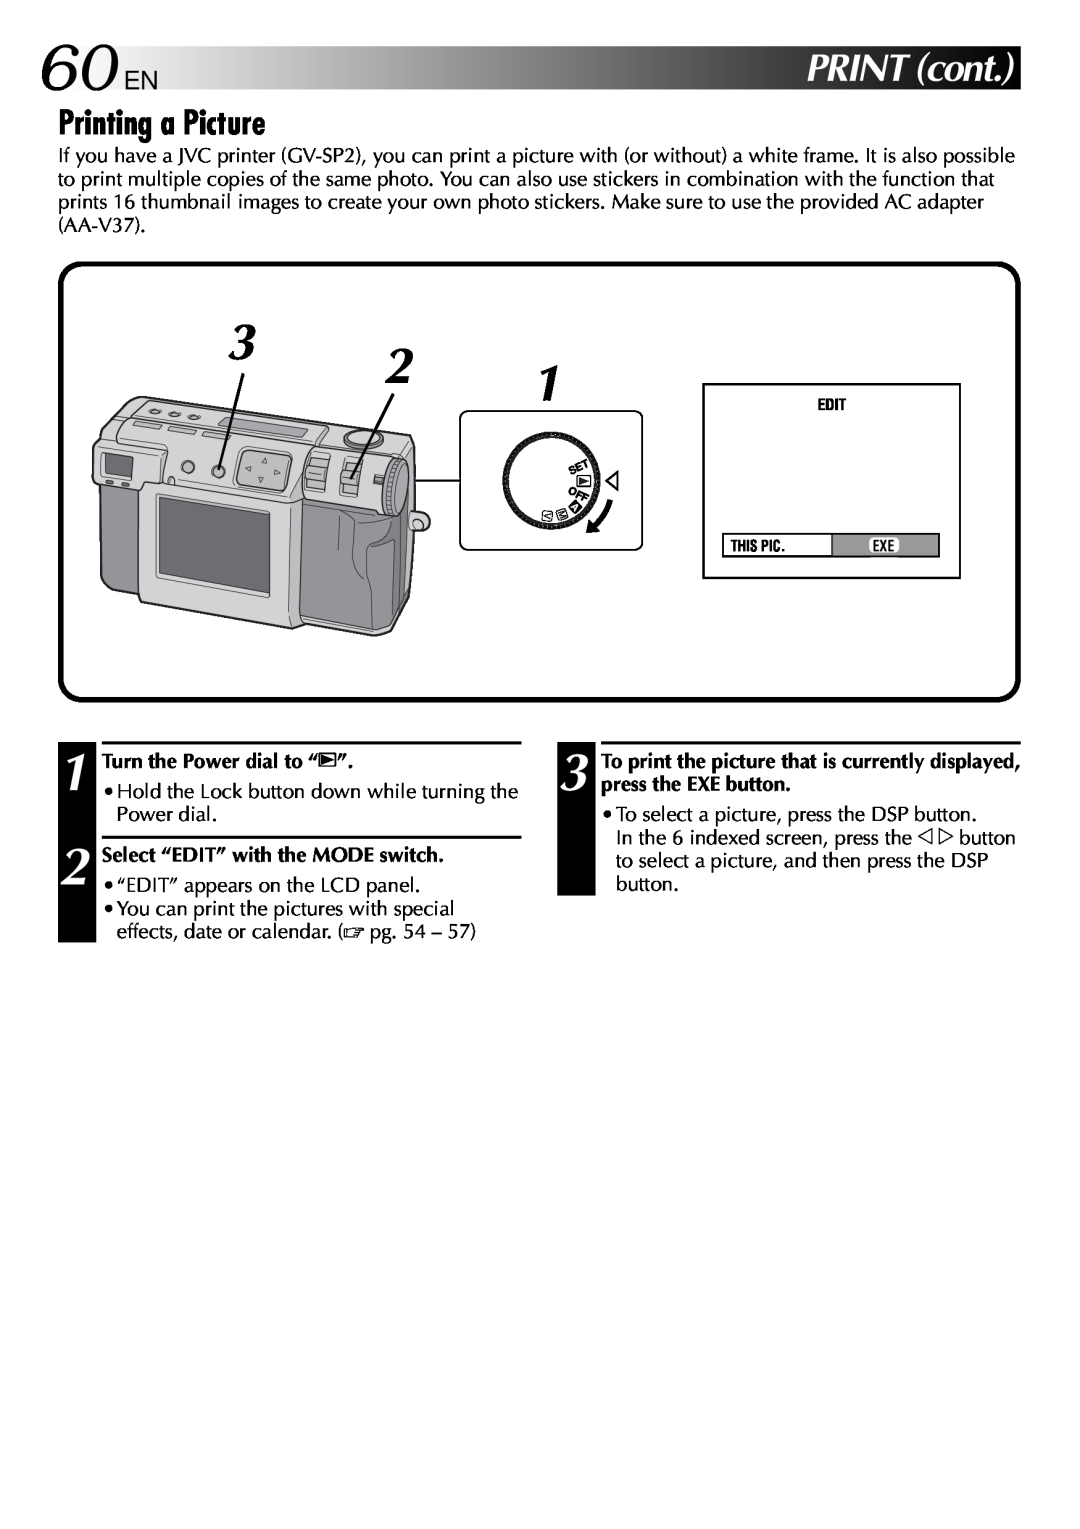 JVC GC-QX3 manual 60EN, PRINTcont, Printing a Picture, Turn the Power dial to “B”, press the EXE button 